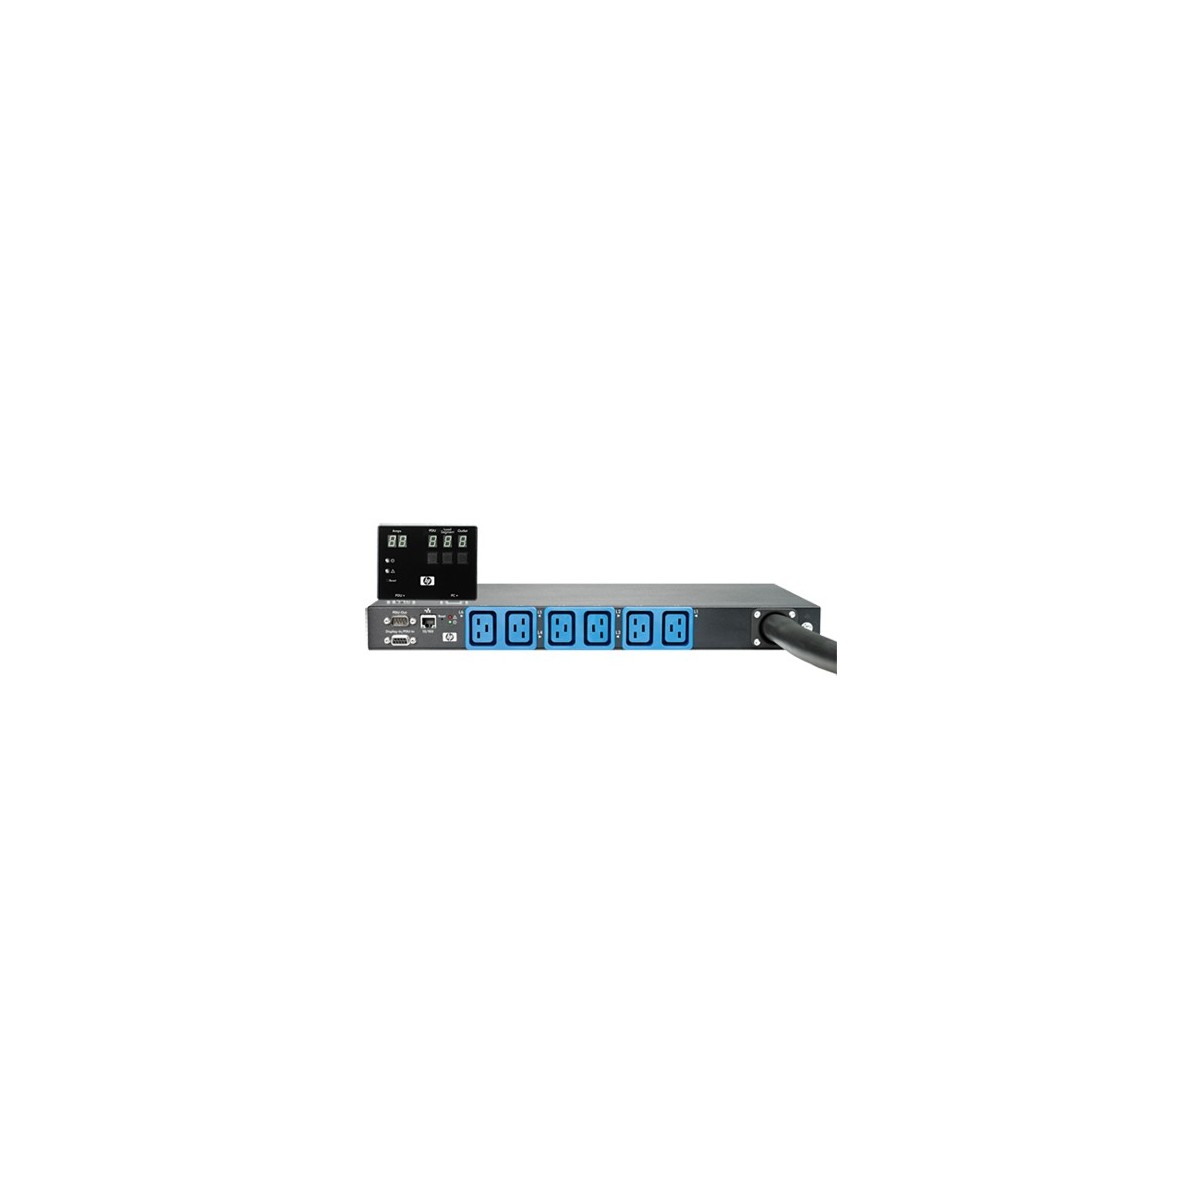 HPE 16A 3 Phase Intl Core Only Intelligent Modular PDU - Modular - Black - Blue - 6 AC outlet(s) - C19 coupler - (Single) IEC603